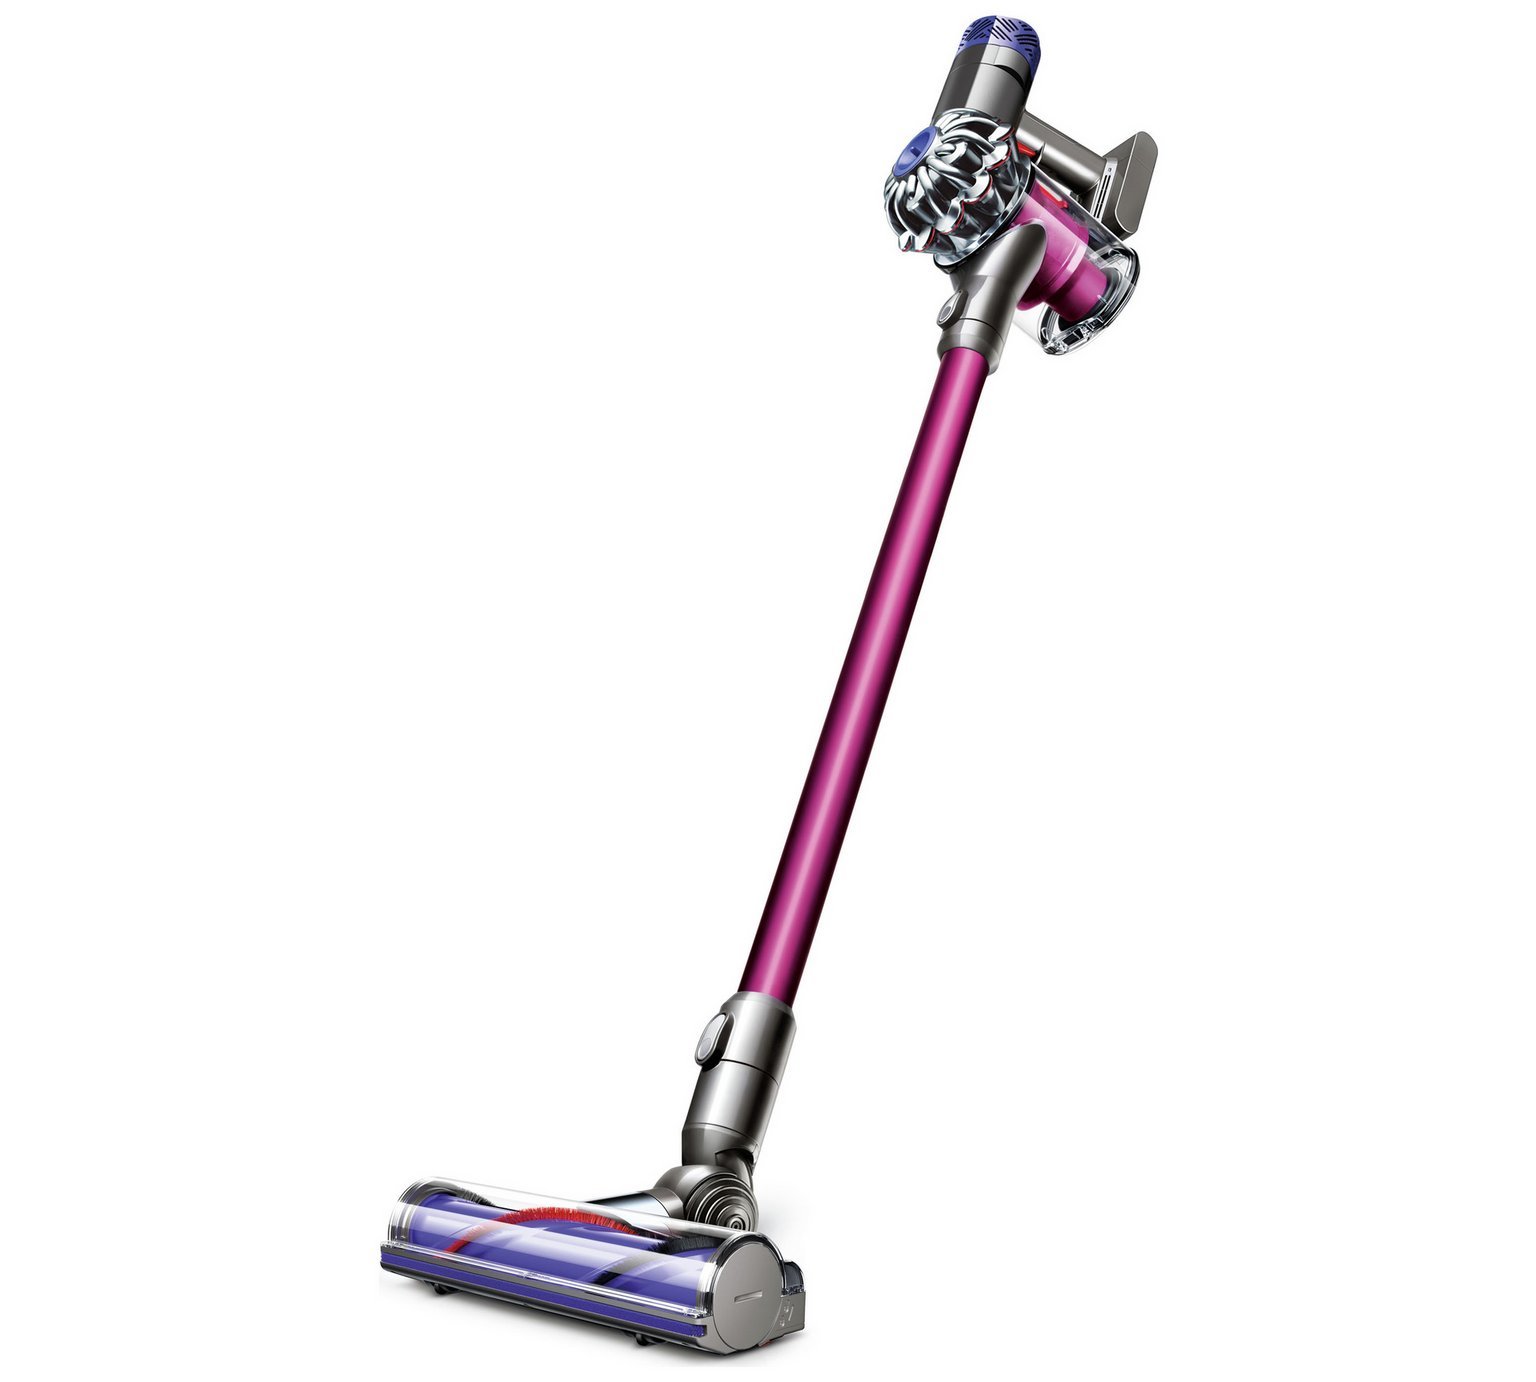 Dyson V6 Absolute Cordless Handstick Vacuum Cleaner